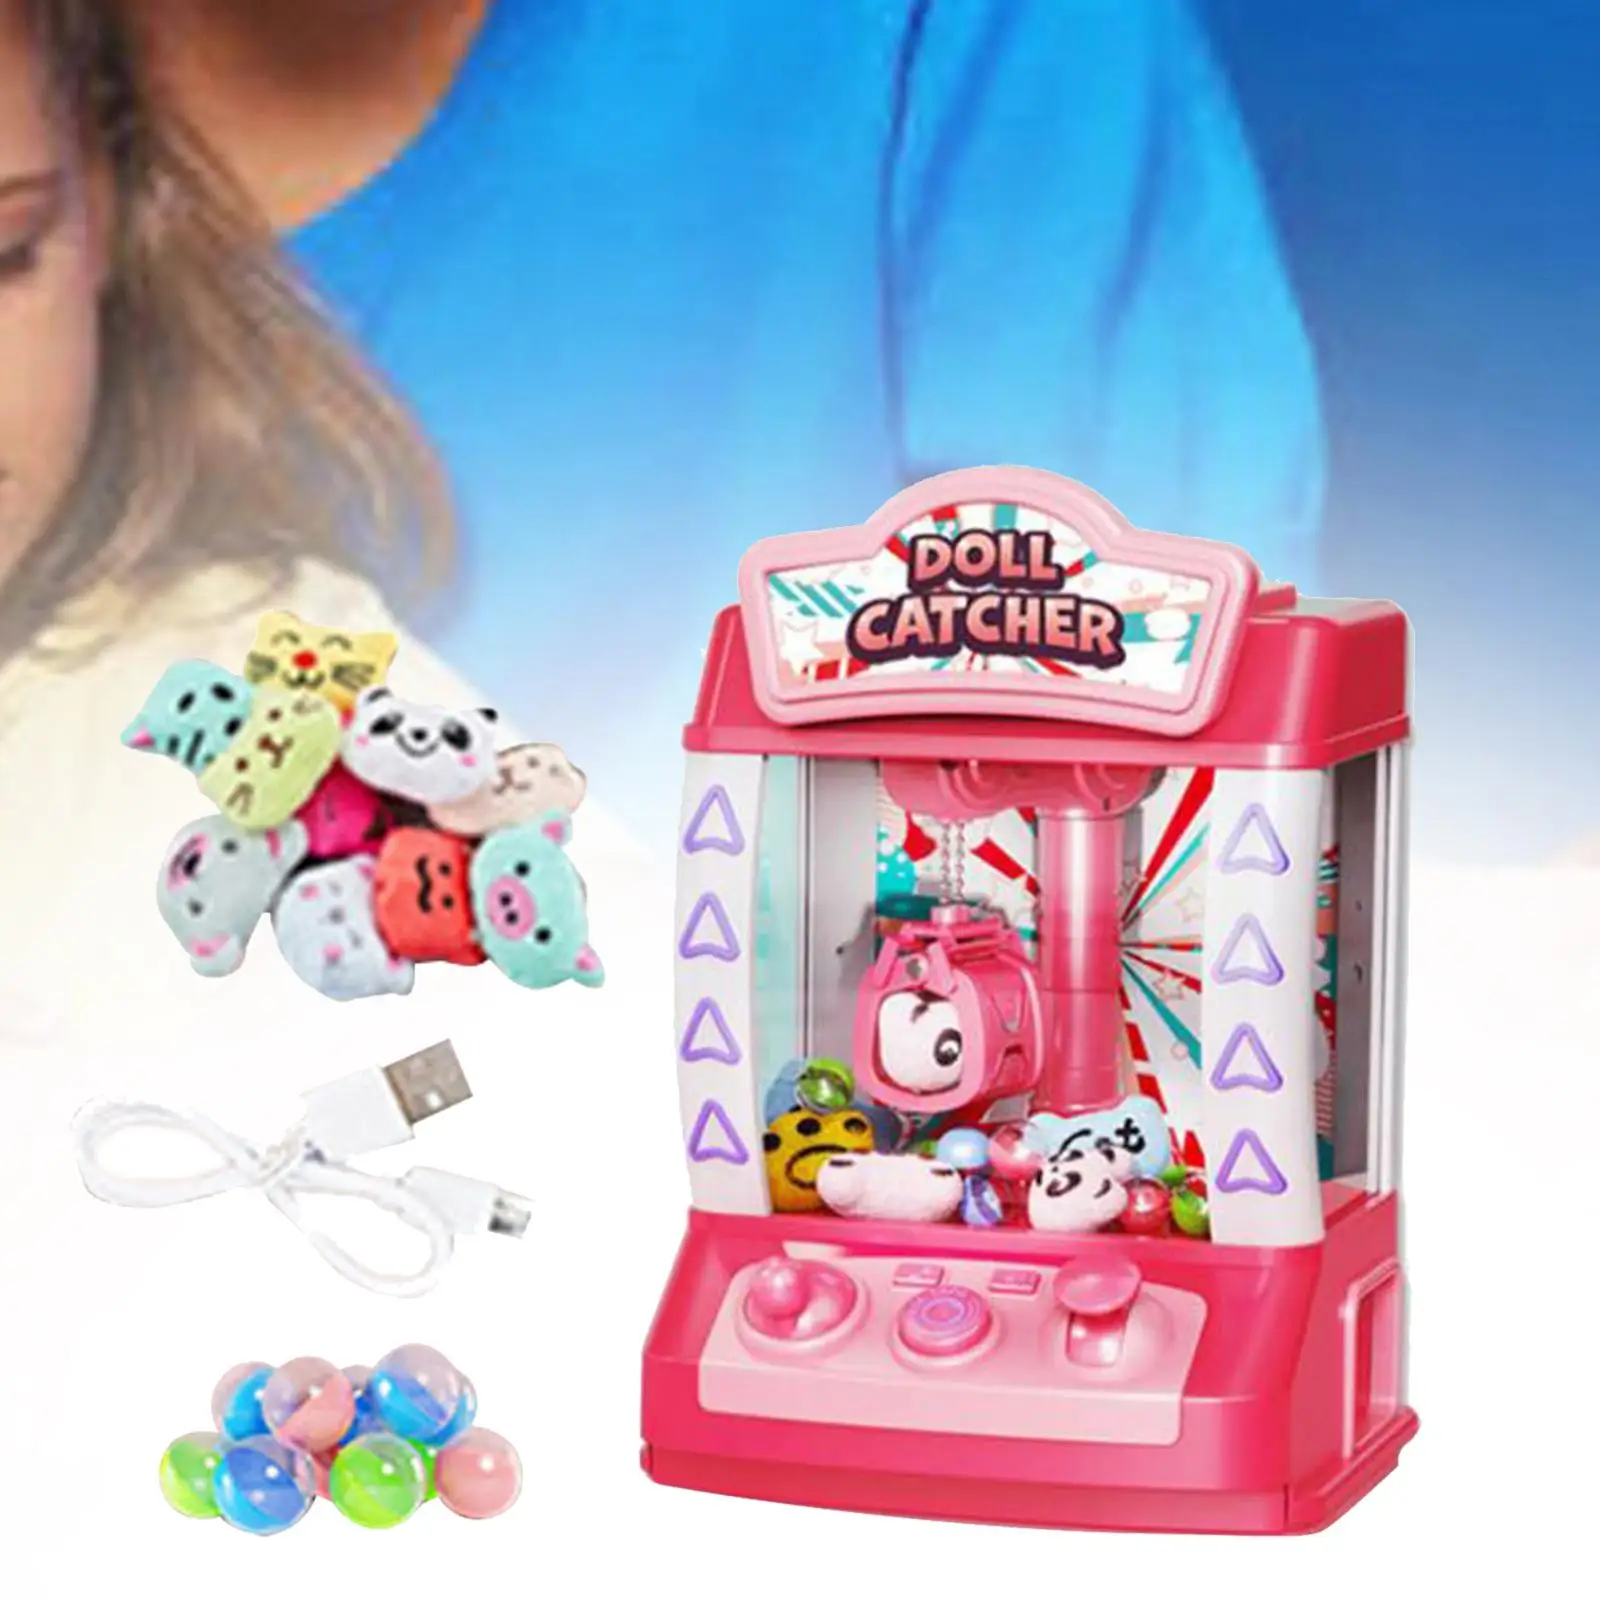 Claw Machine Candy Dispenser Toys Valentine`s Day Gifts Mini Vending Machine for Adults Toddlers Children Kids Girls Boys